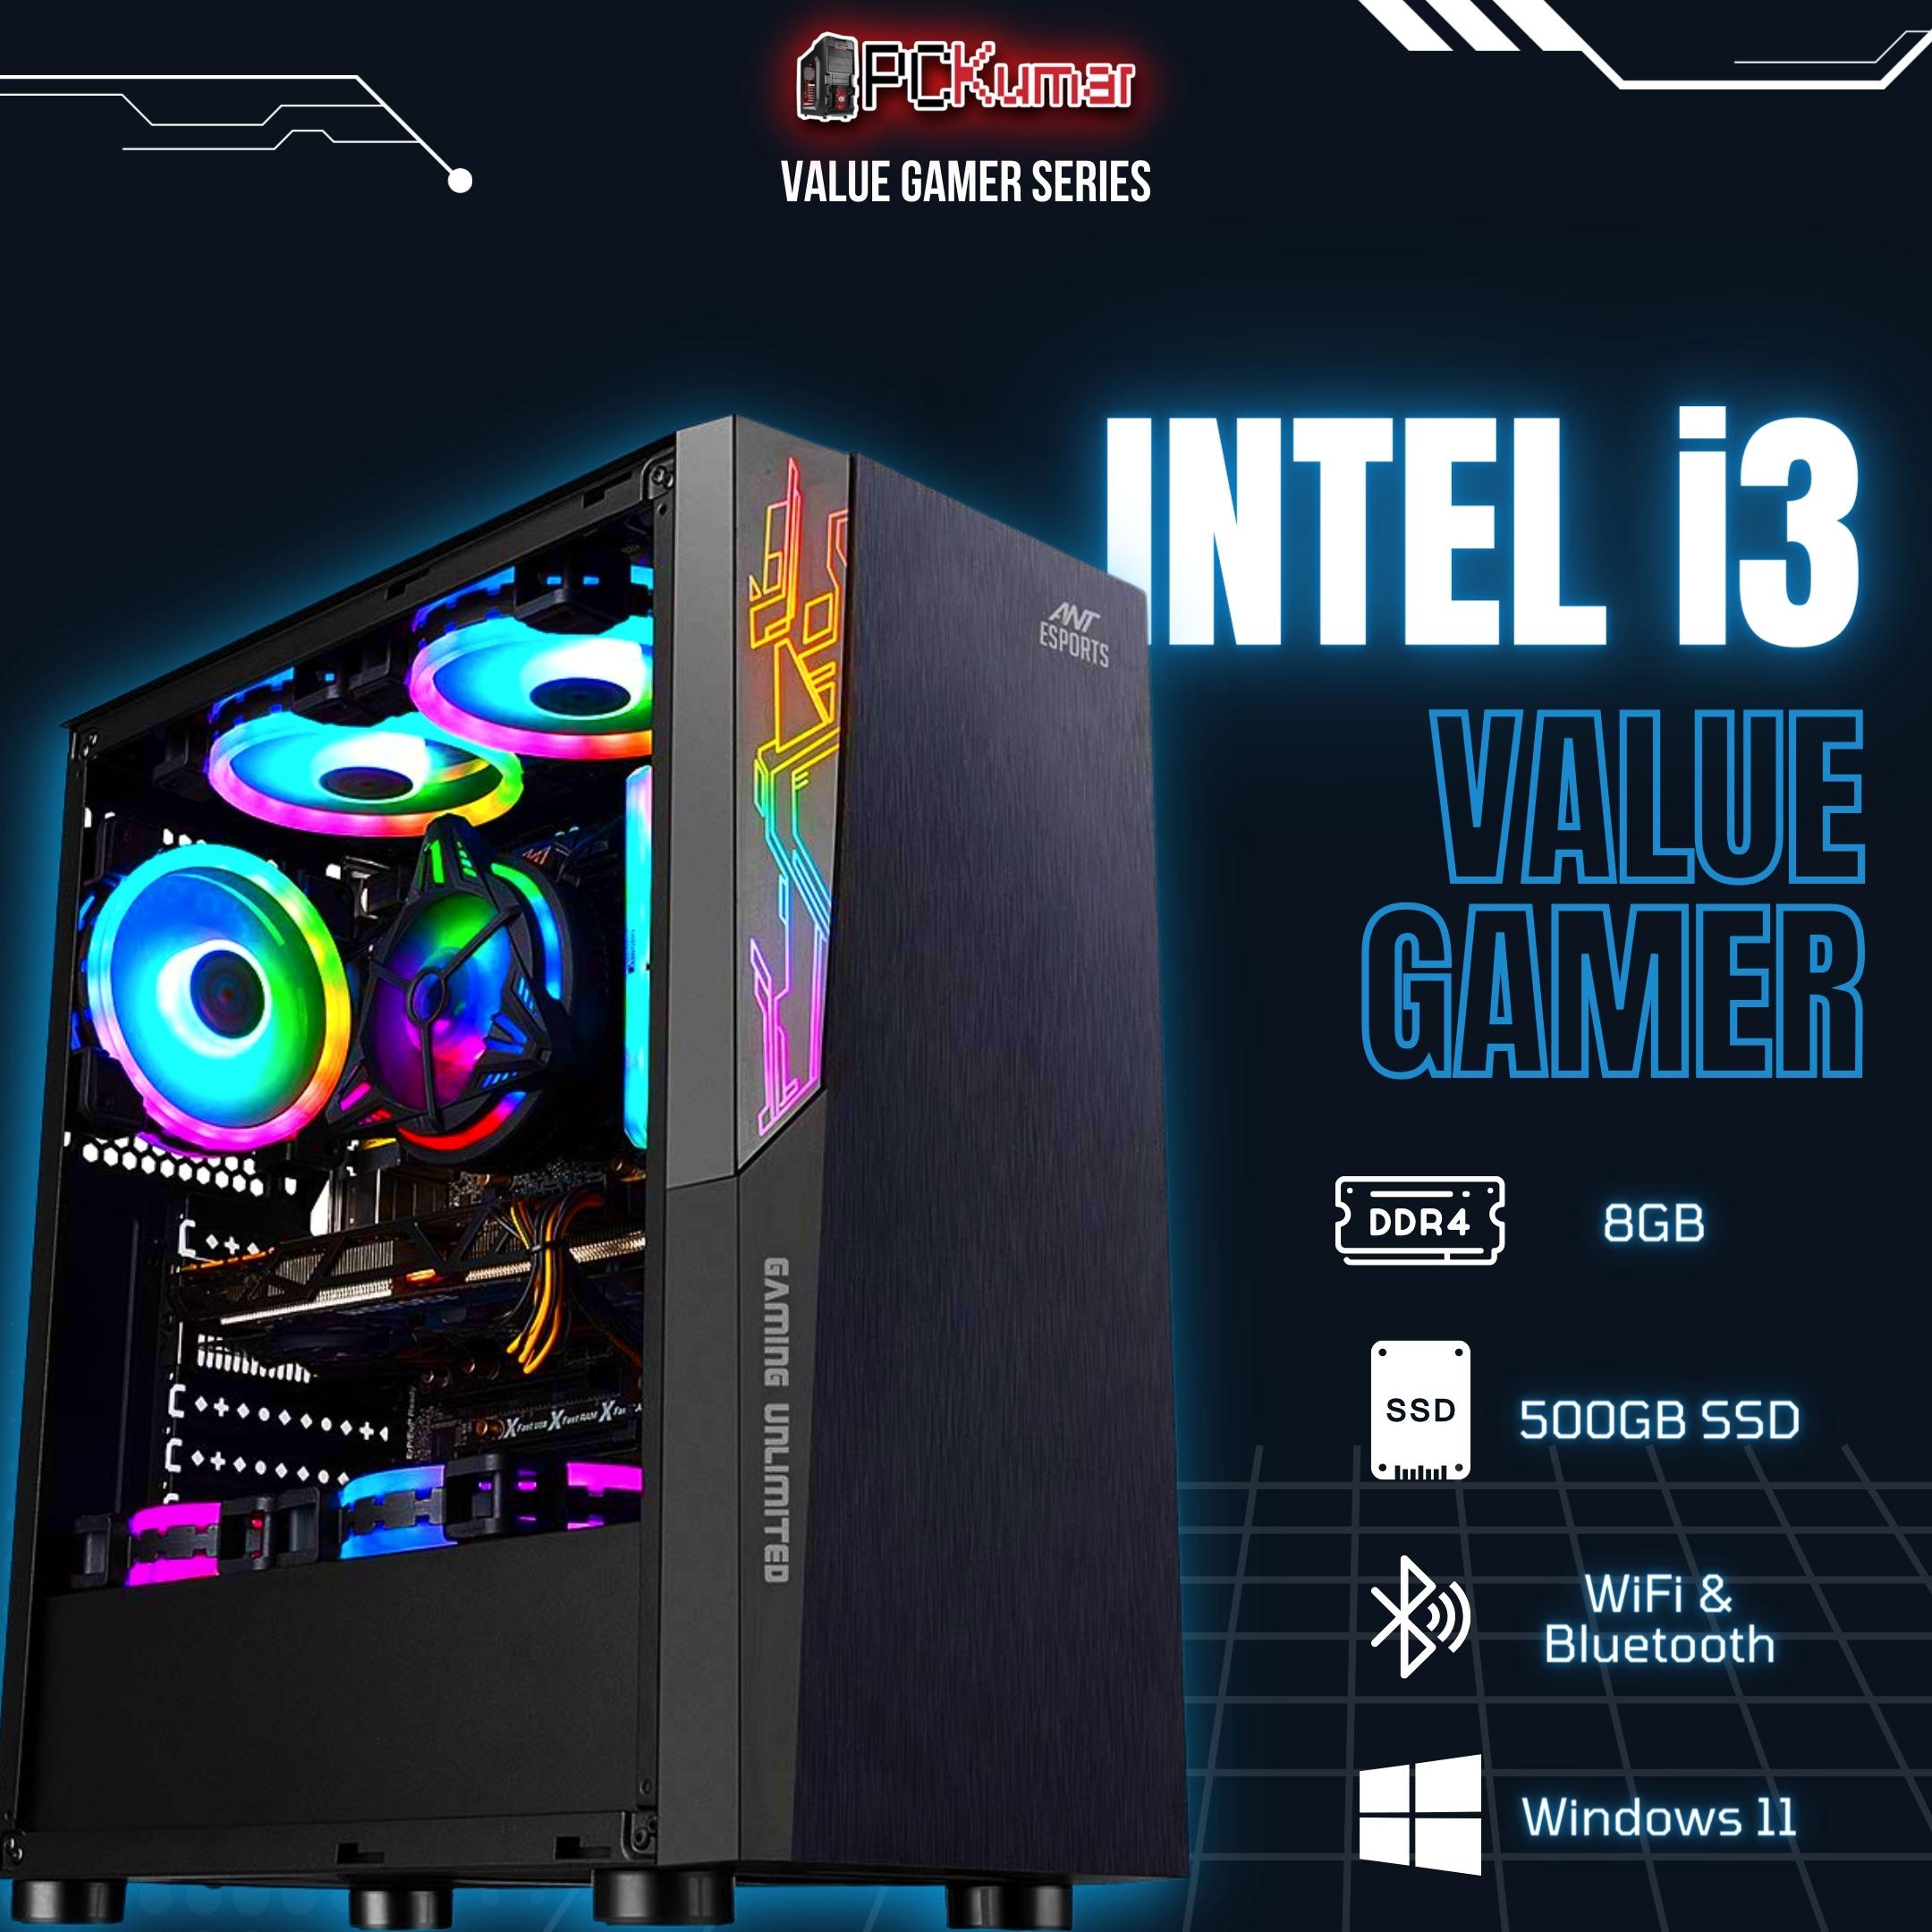 Value Gaming with Intel i5 + RX 550 4GB